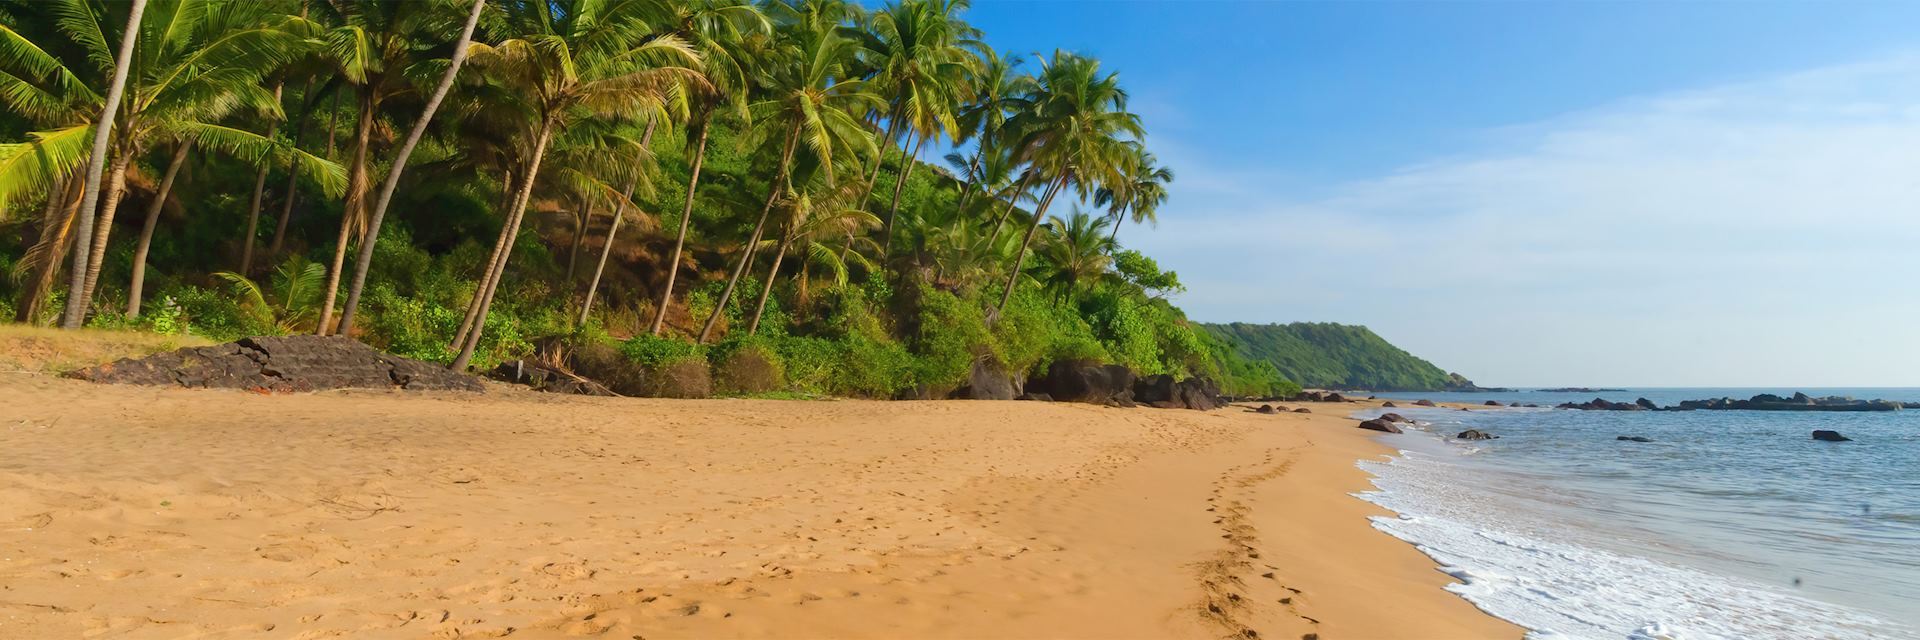 Visit Goa on a trip to India, Goa vacations